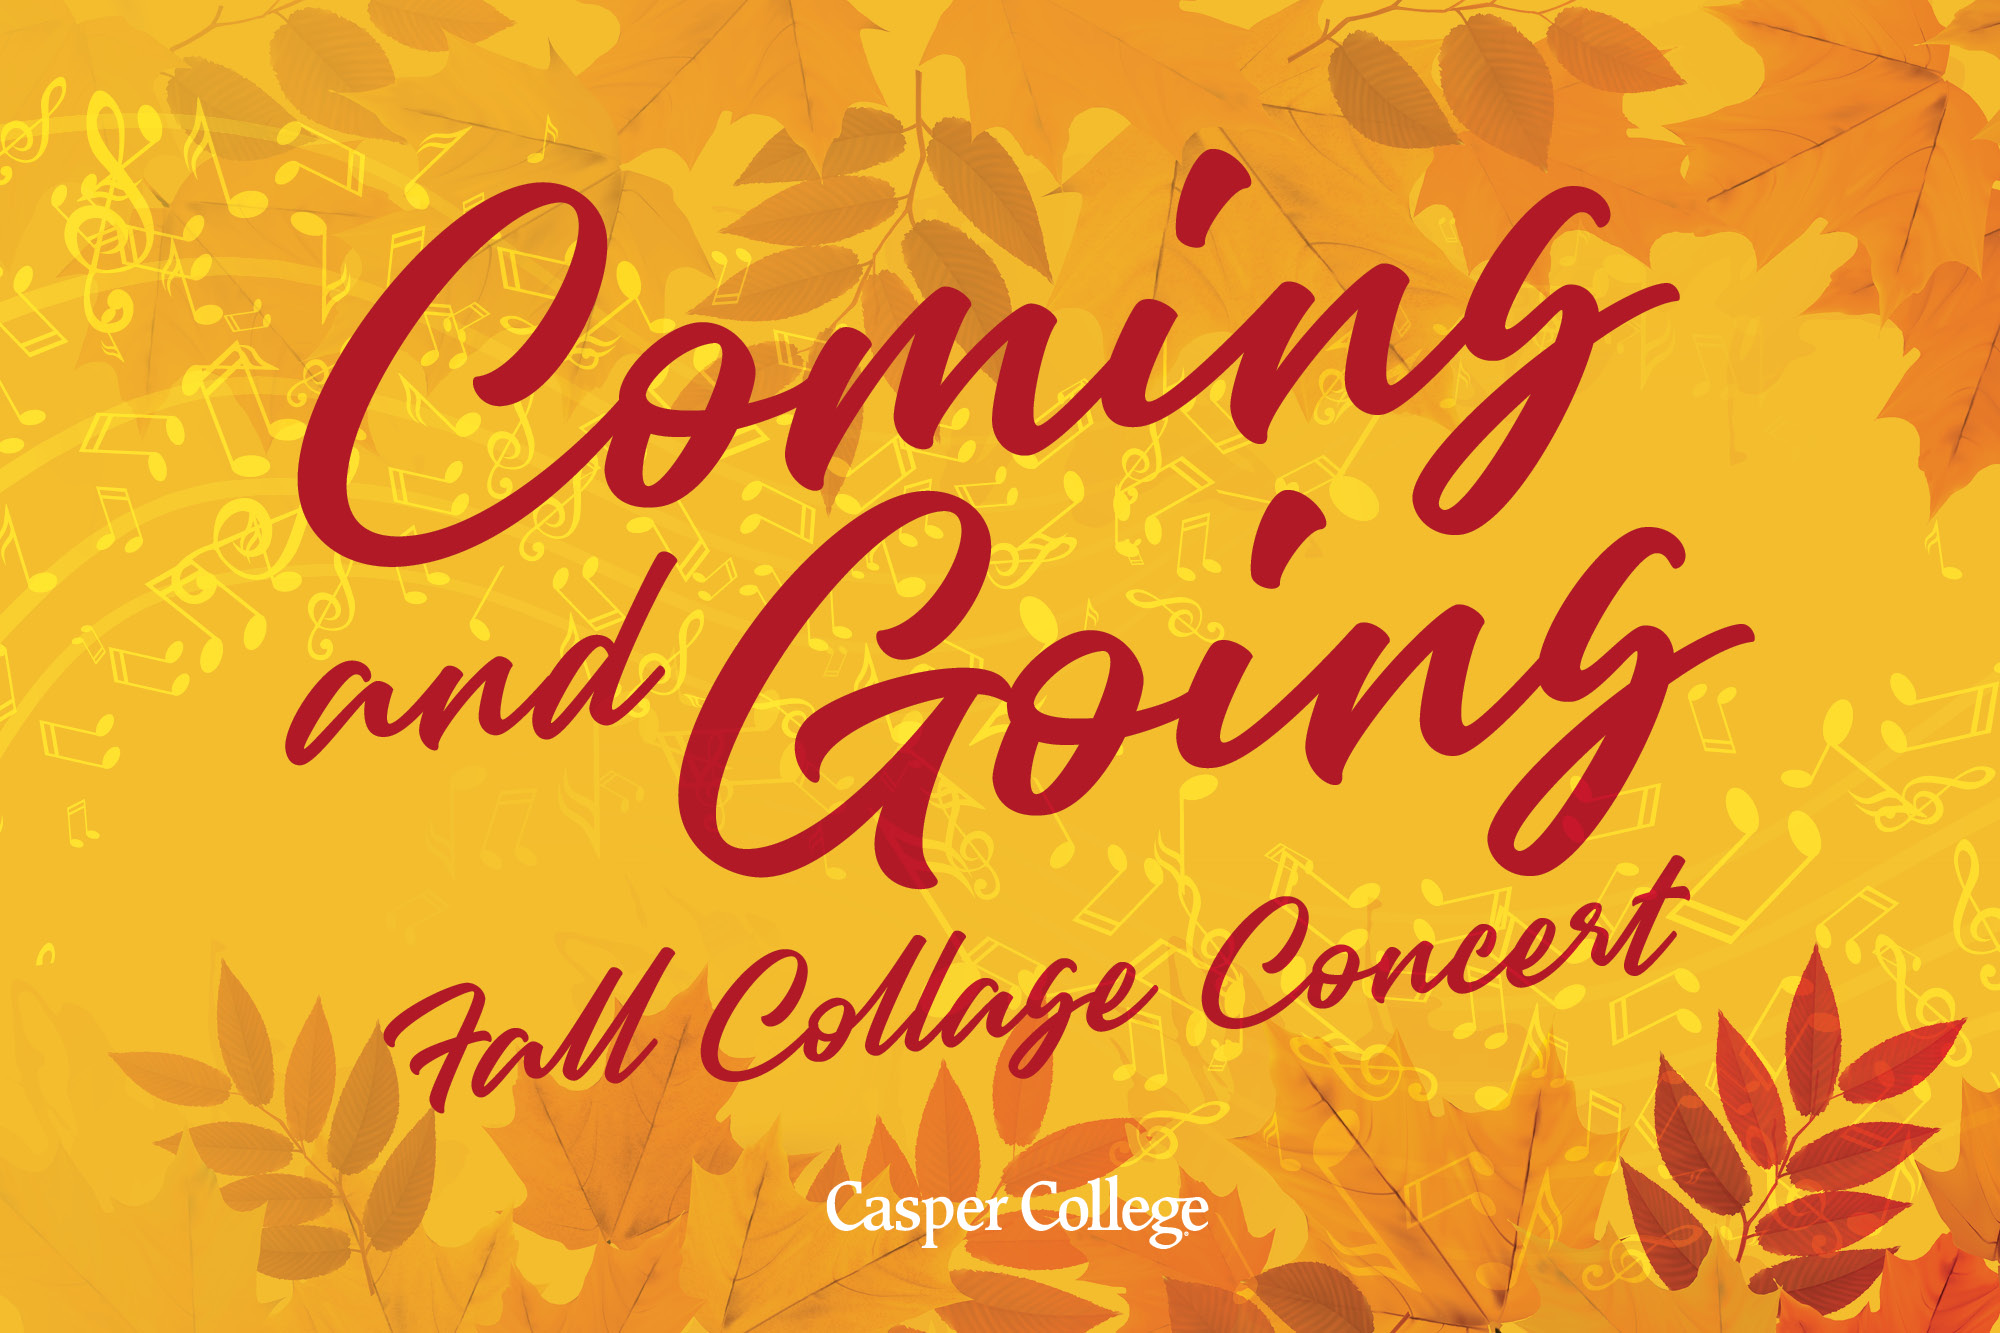 Image for Fall Collage Concert 2023 press release.